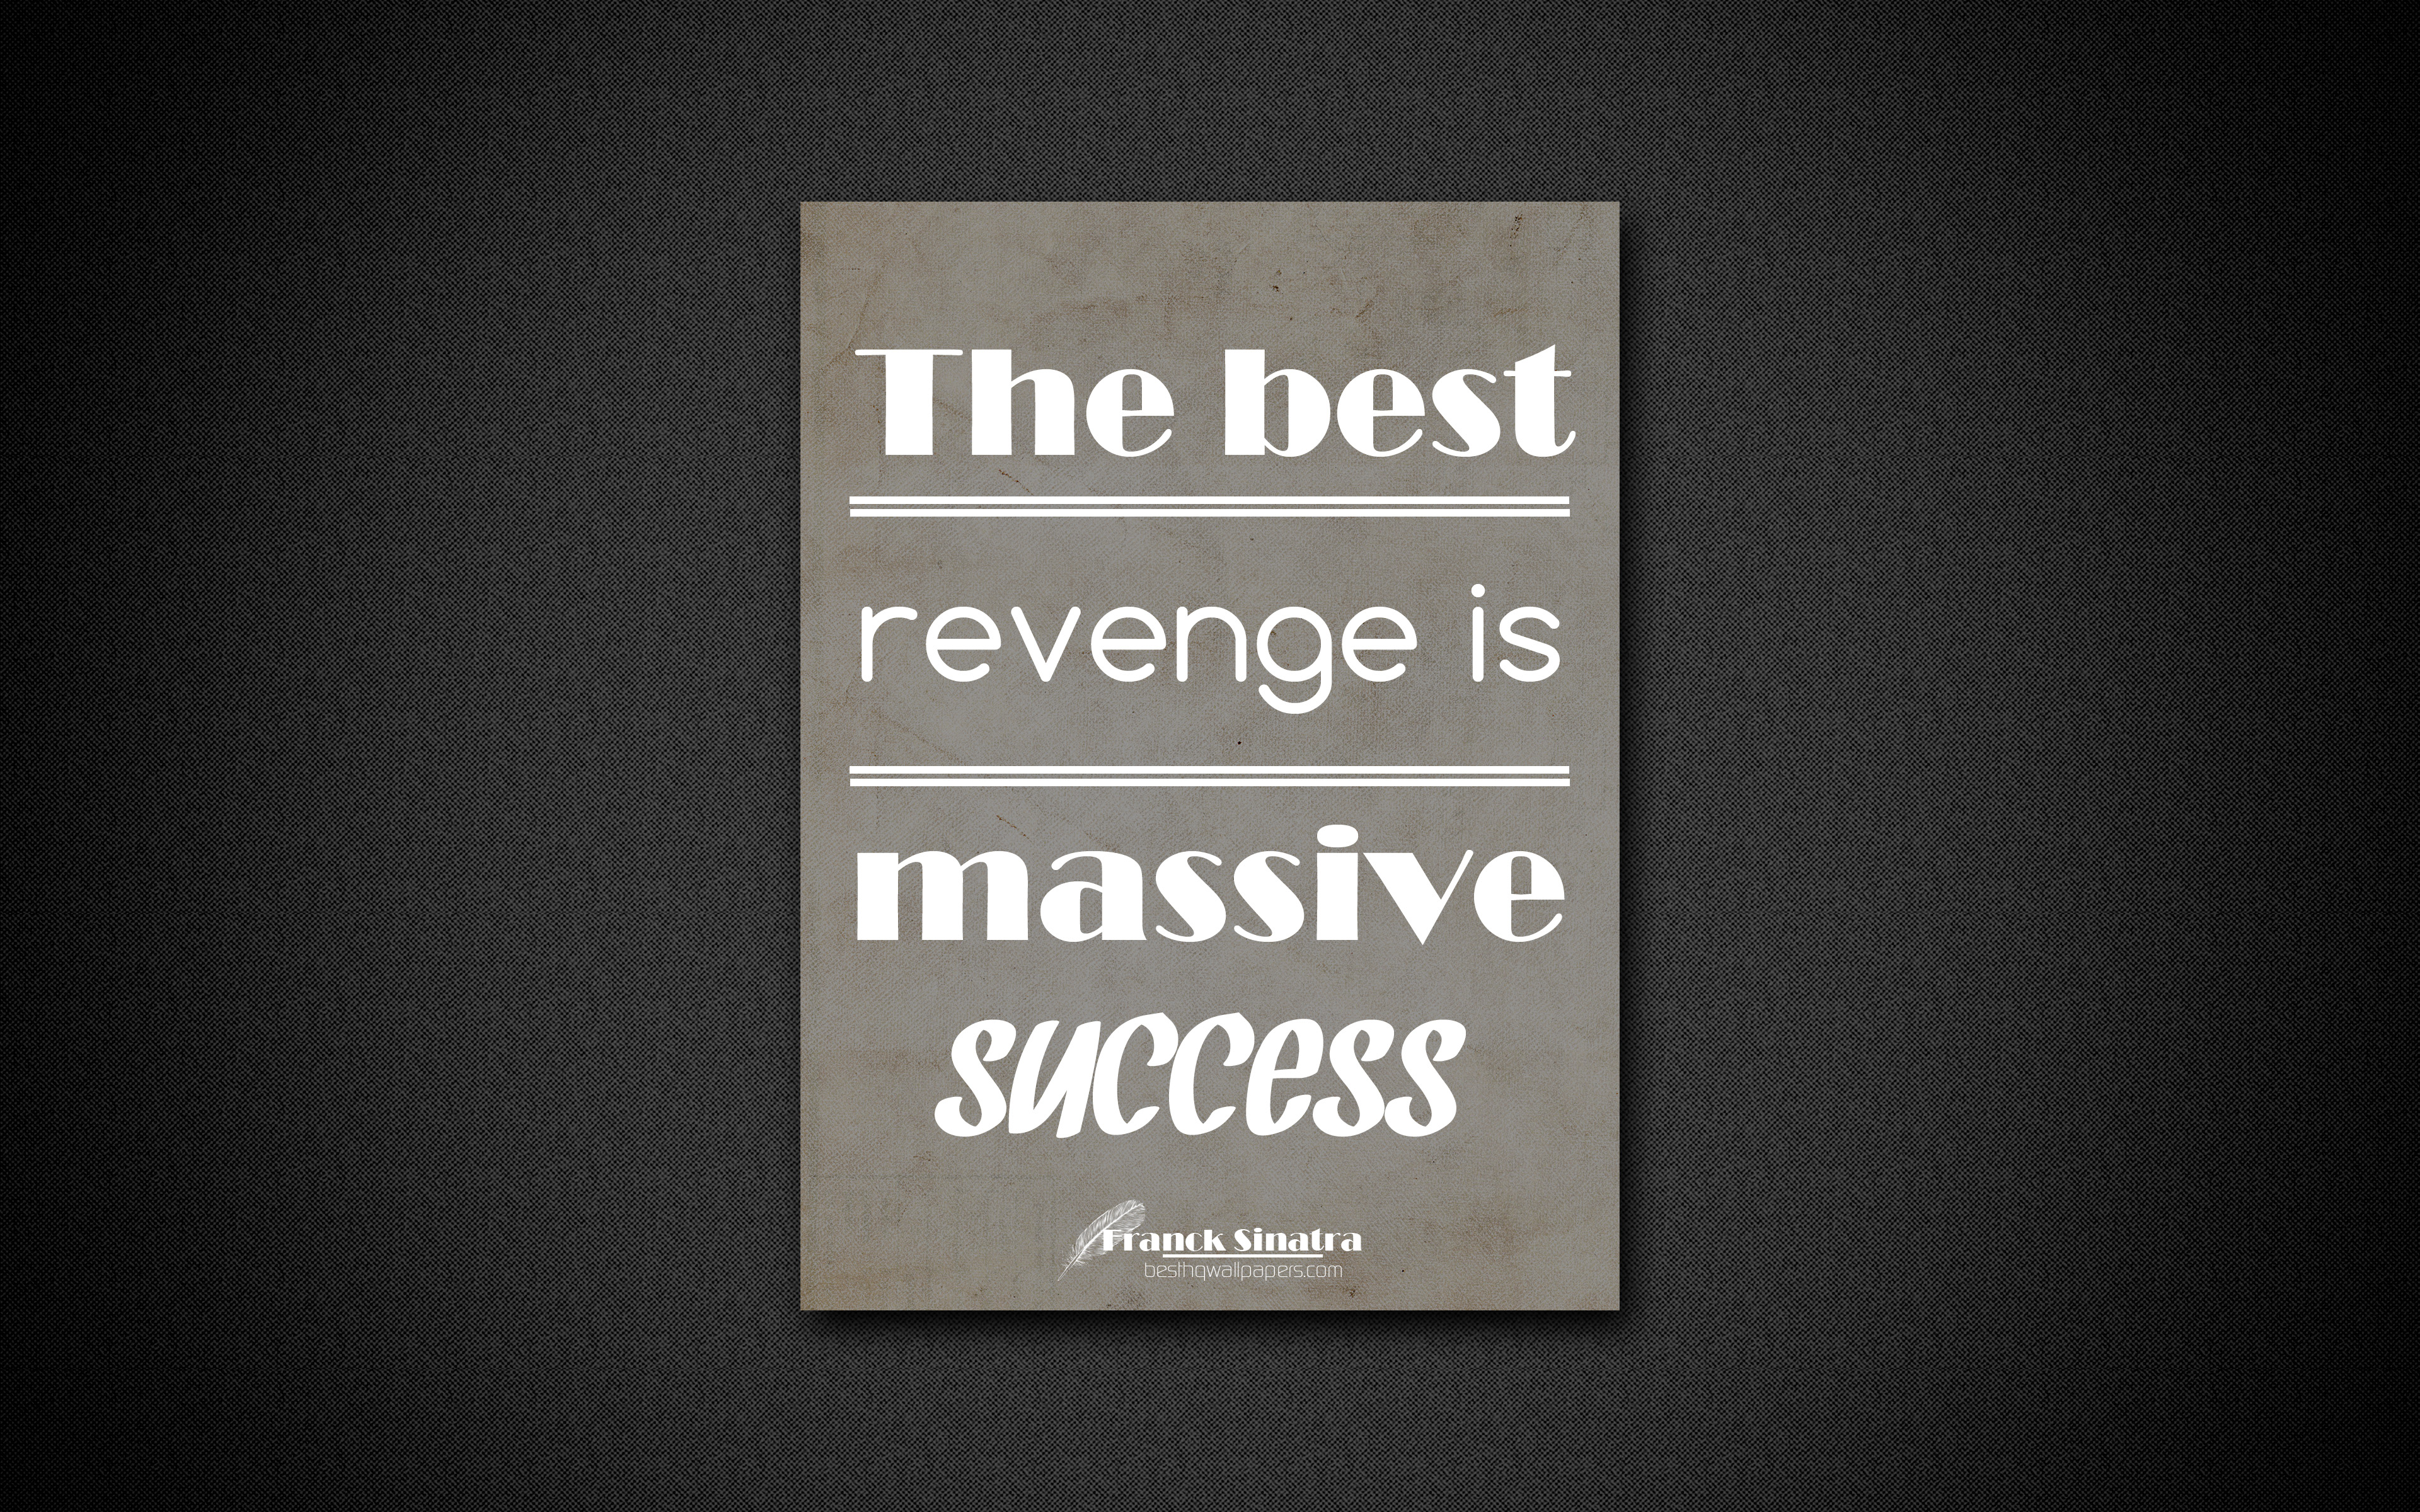 Download wallpaper 4k, The best revenge is massive success, Franck Sinatra, gray paper, popular quotes, inspiration, Franck Sinatra quotes, quotes about success for desktop with resolution 3840x2400. High Quality HD picture wallpaper